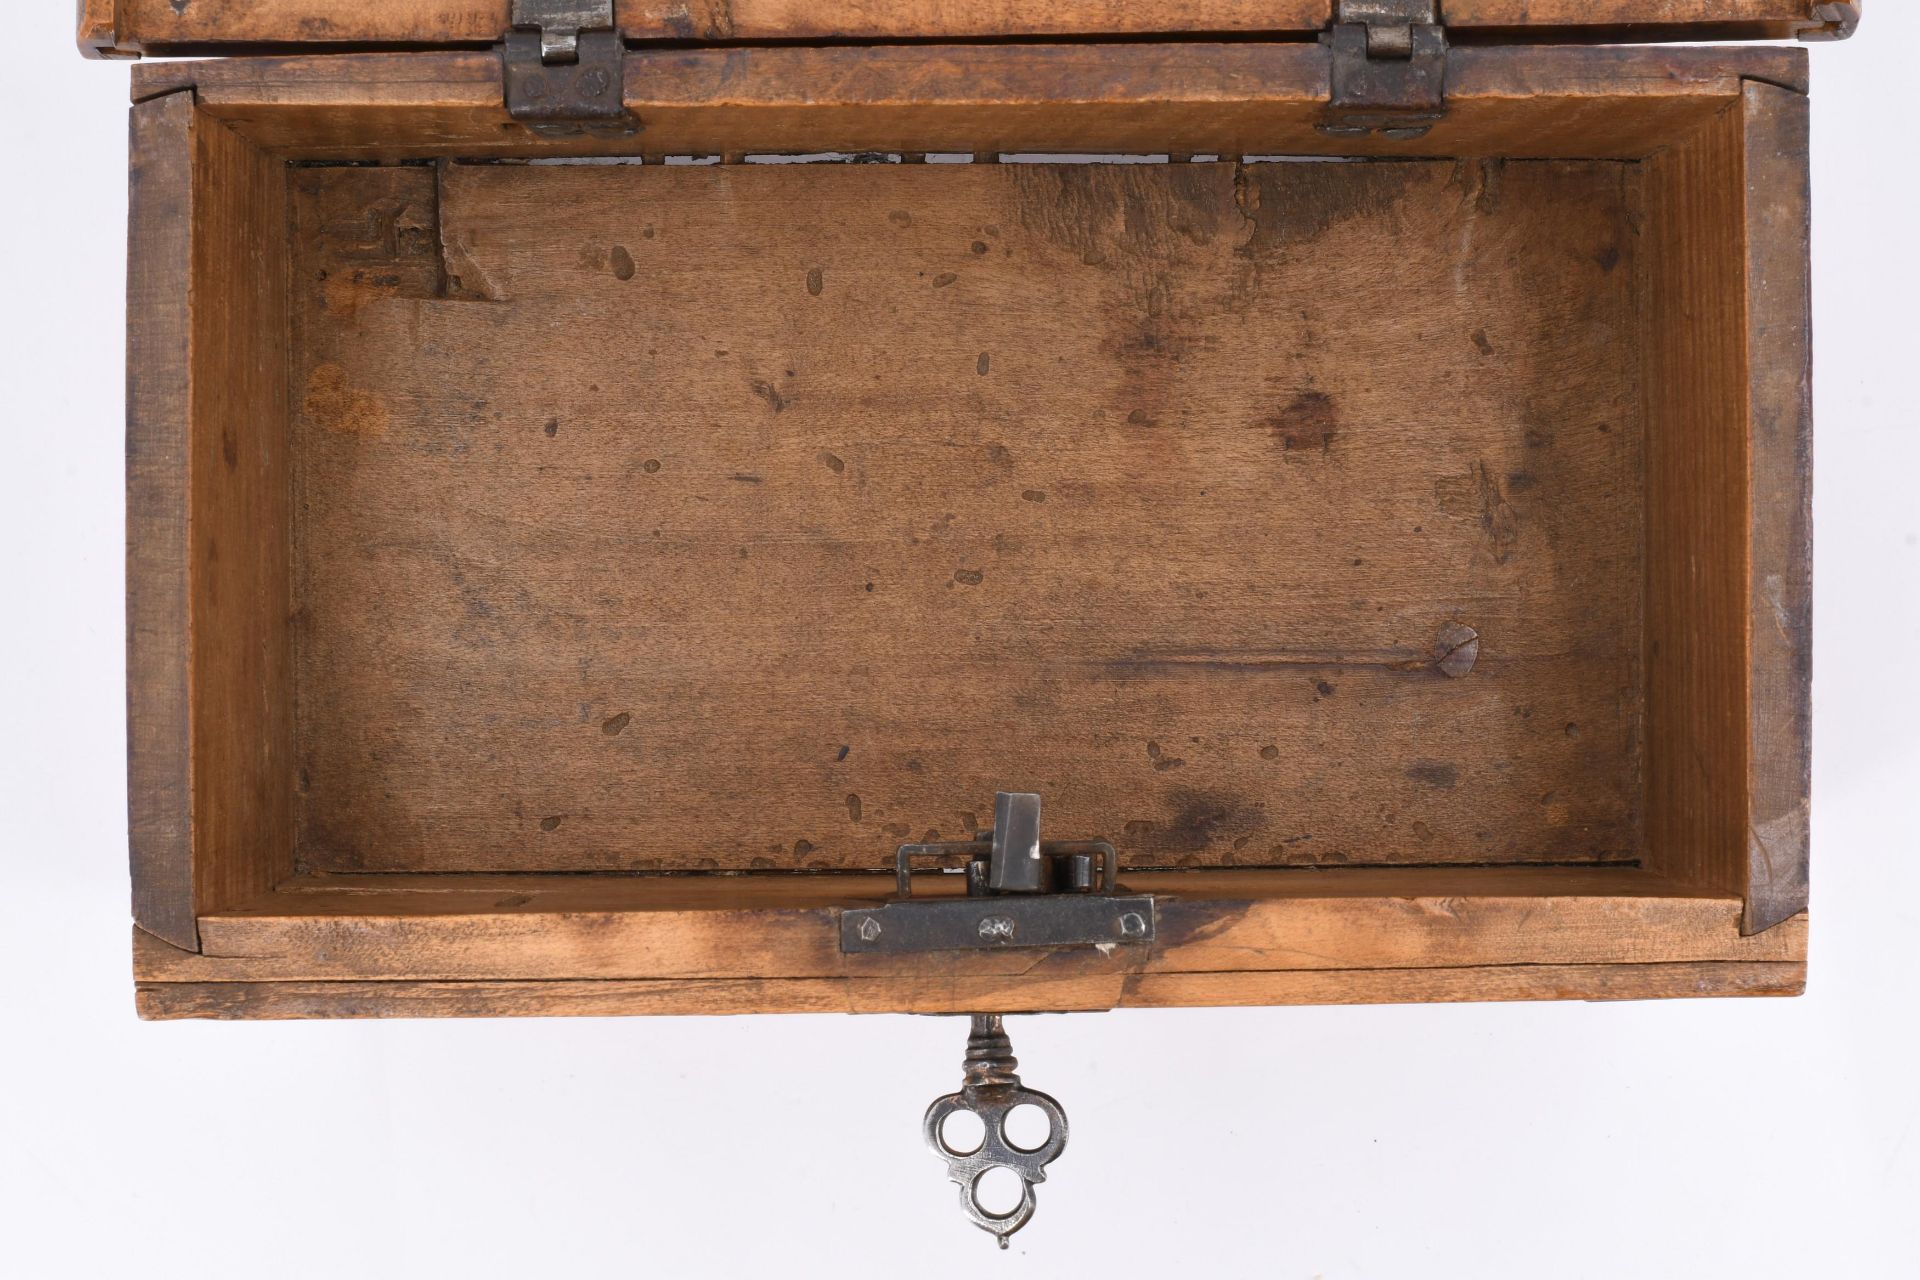 Small chest with ornamental décor - Image 8 of 8